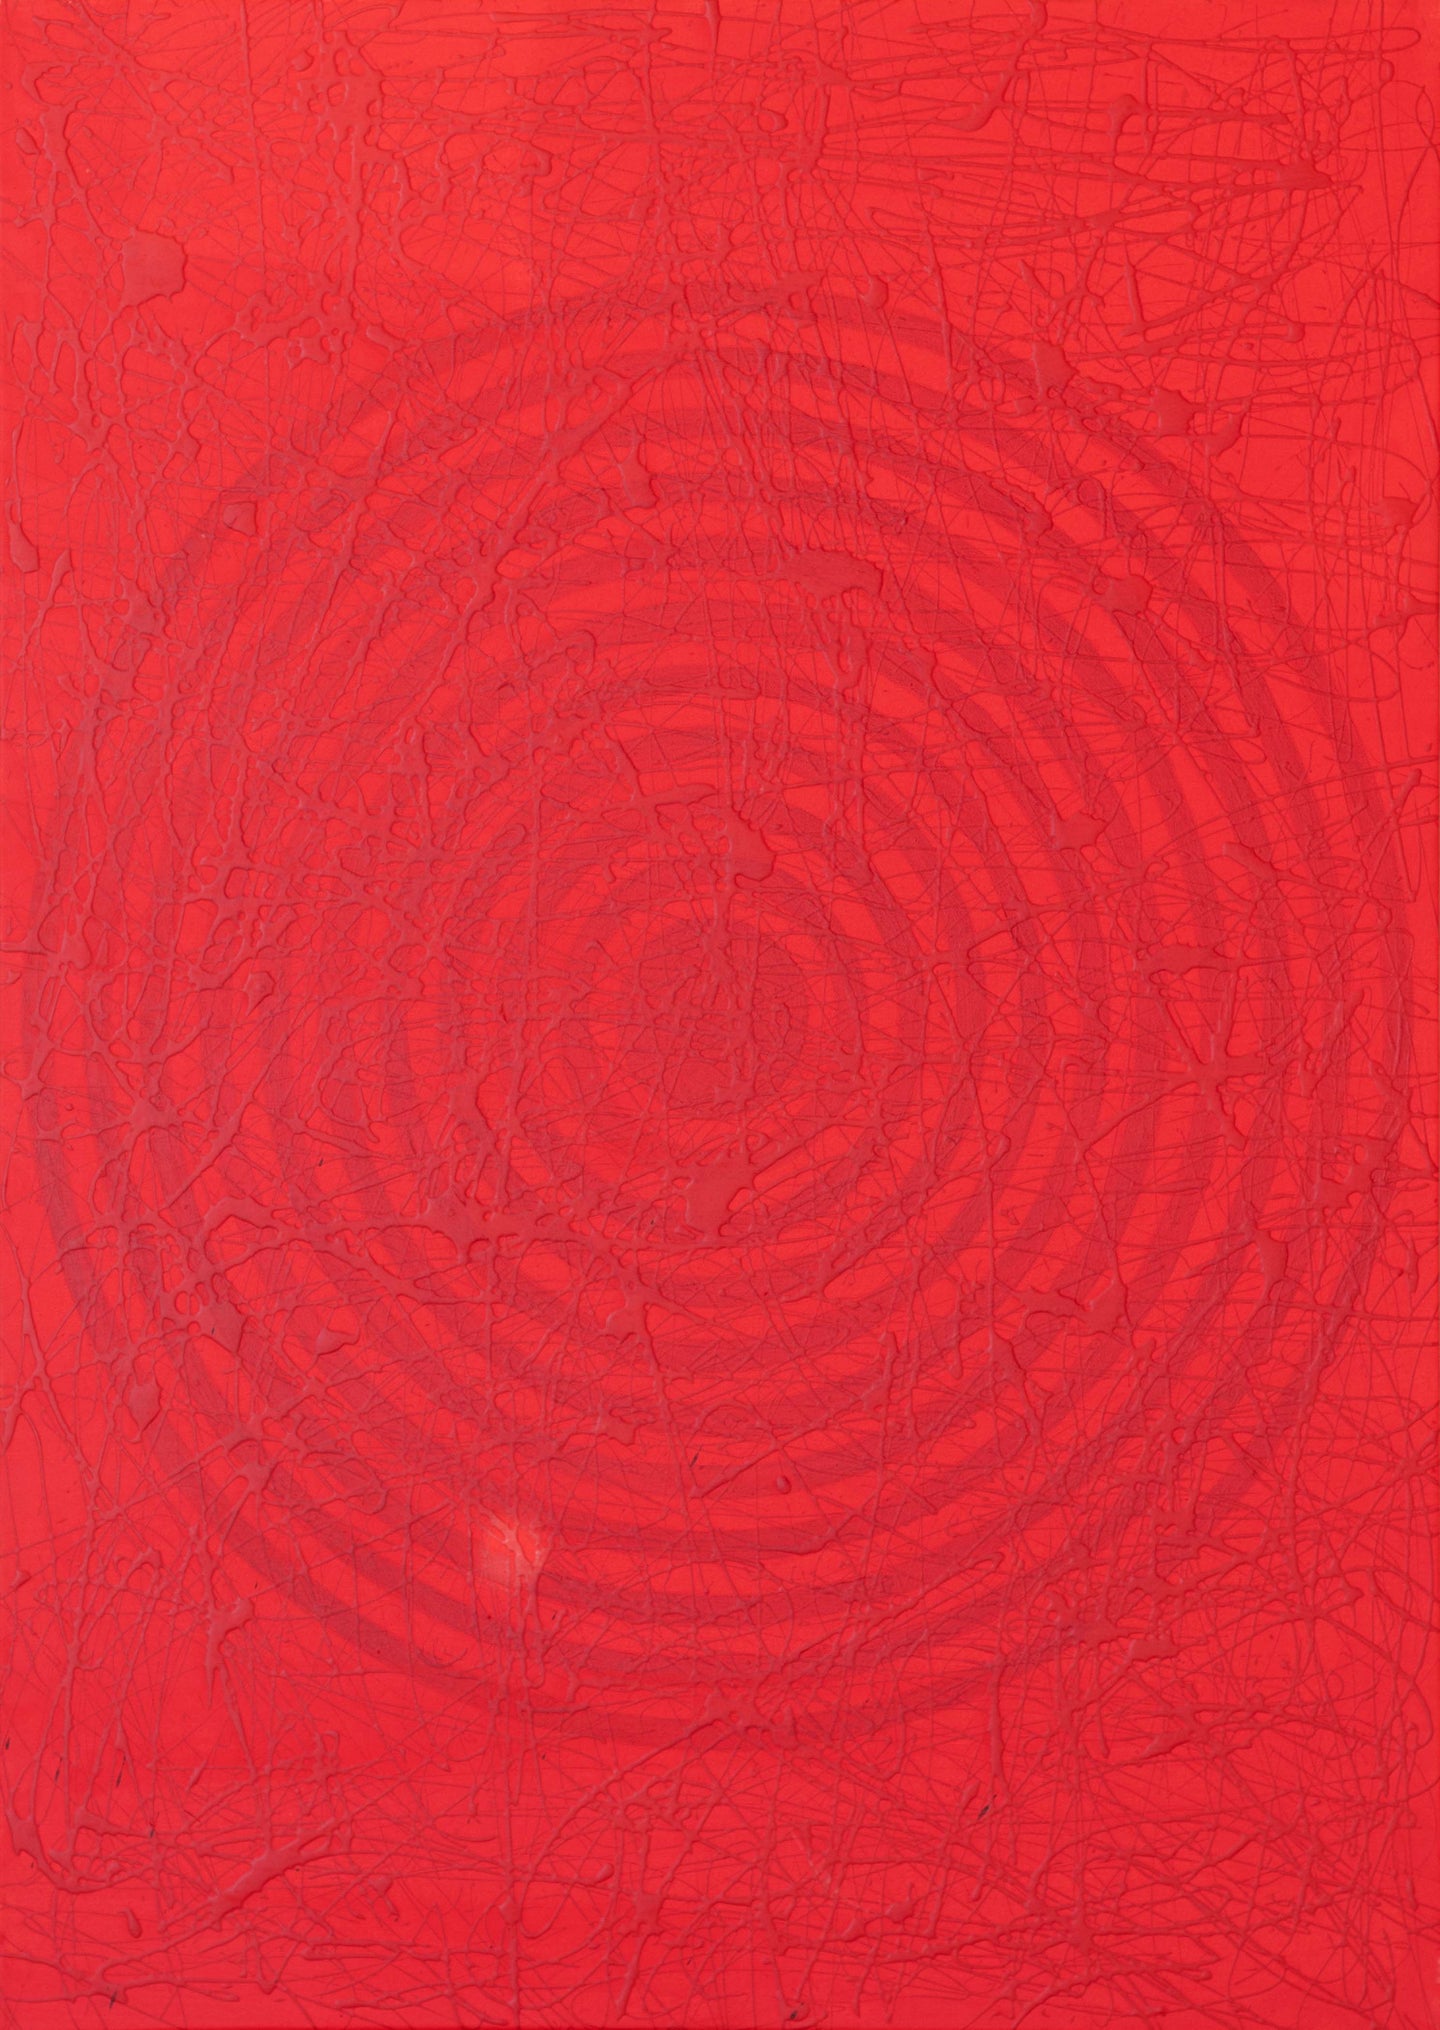 J. Steven Manolis, Red on Red Concentric, 2022, Acrylic and Latex enamel on canvas, 40 x 30 inches, red abstract wall art